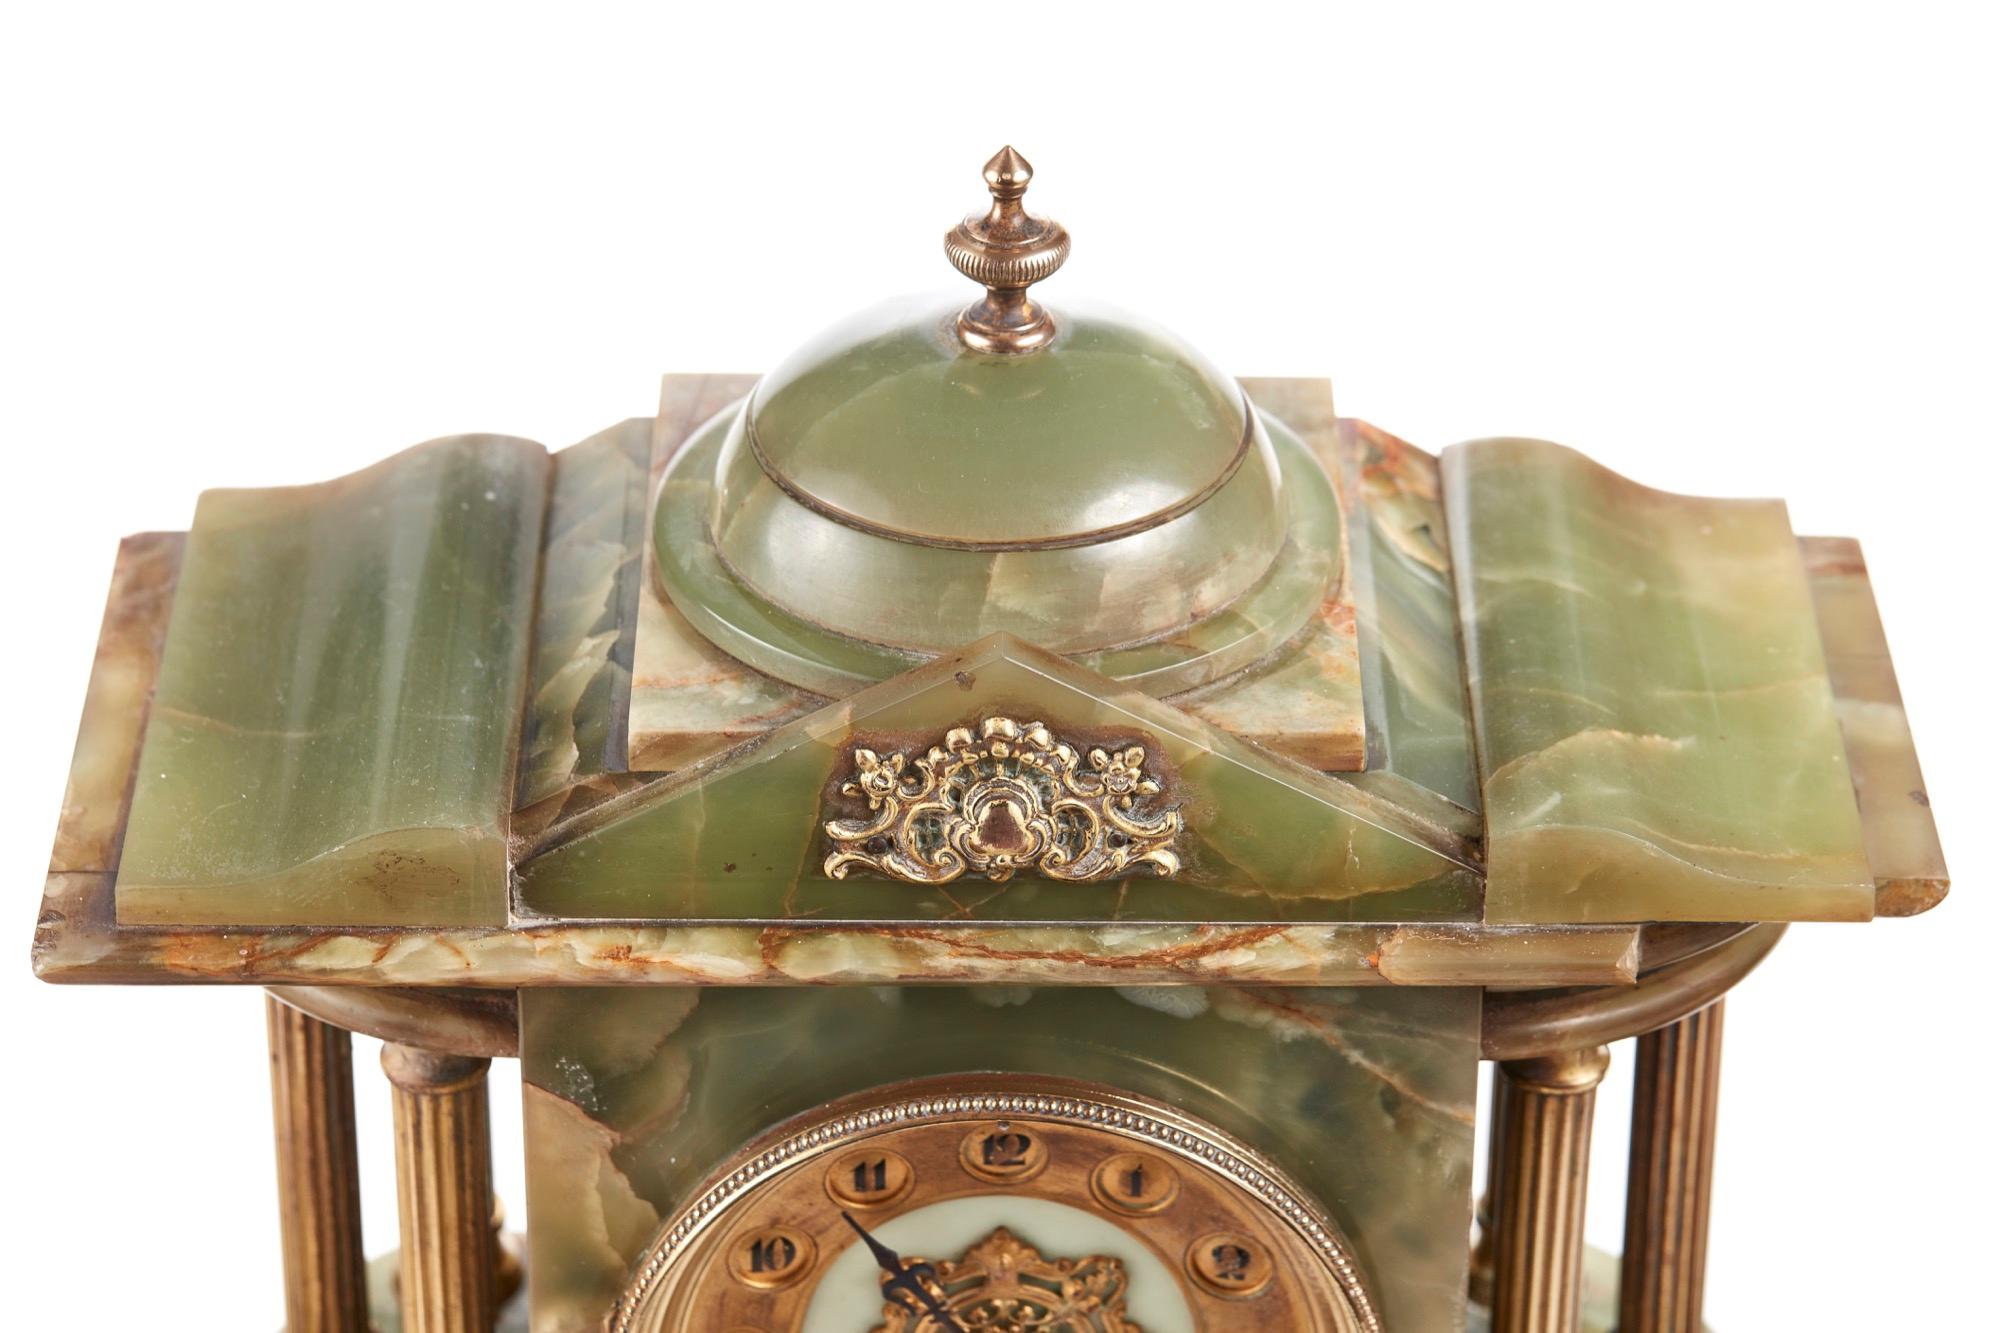 Outstanding antique French clock set, the clock is a beautiful green onyx with gilded mounts. 8 day French movement striking on a bell. Shaped top, Corinthian column supports standing on a plinth base. The matching urns are also made of beautiful